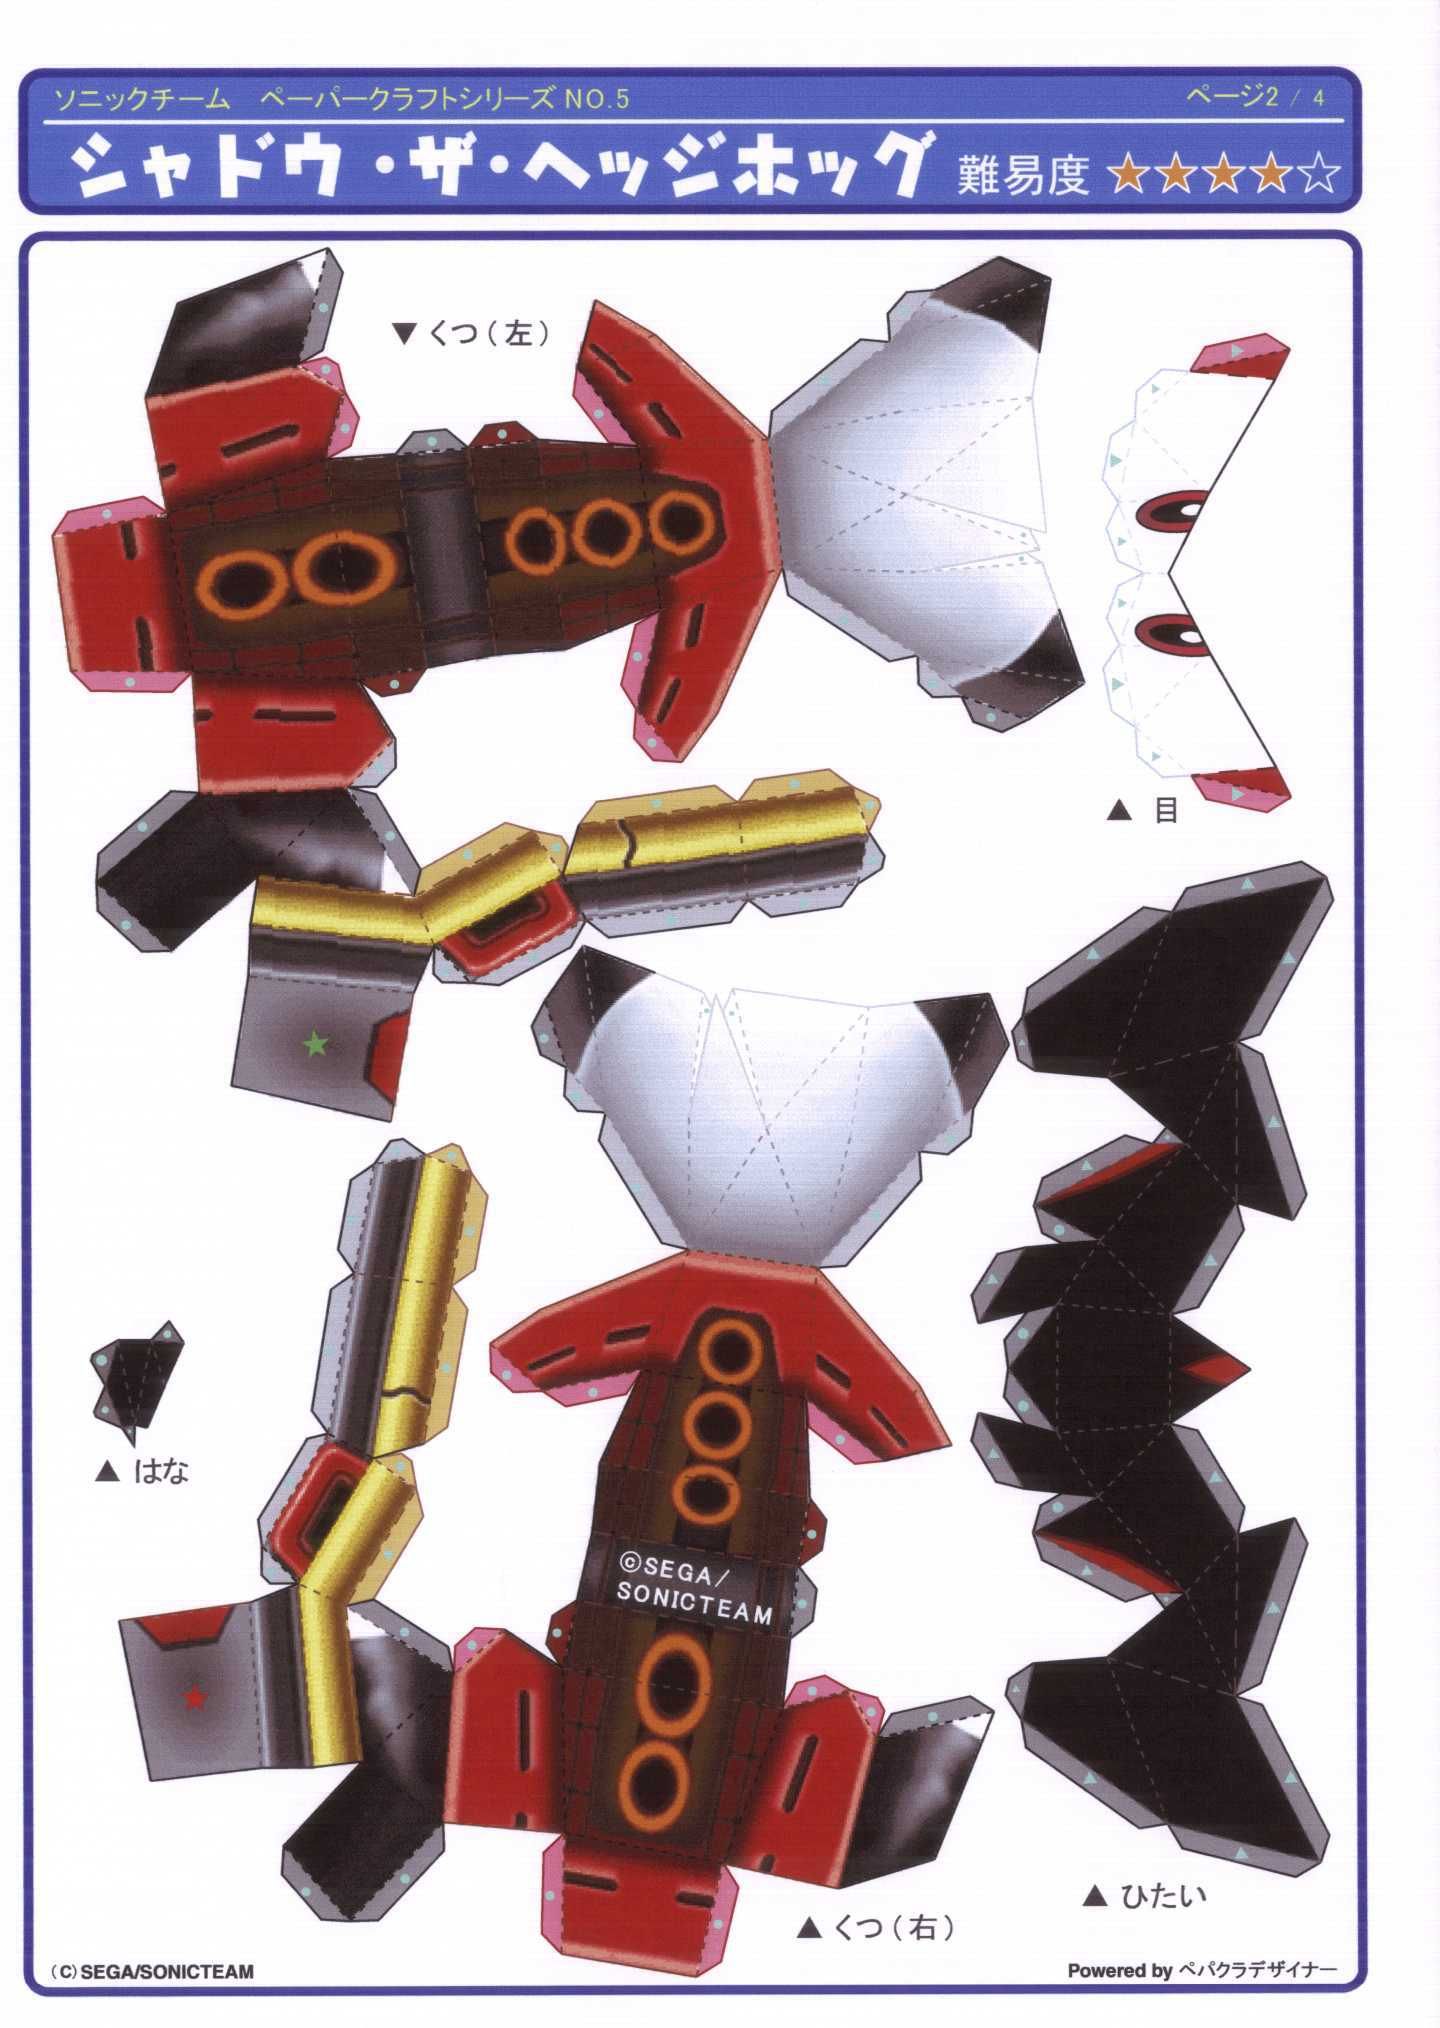 sonic papercraft template